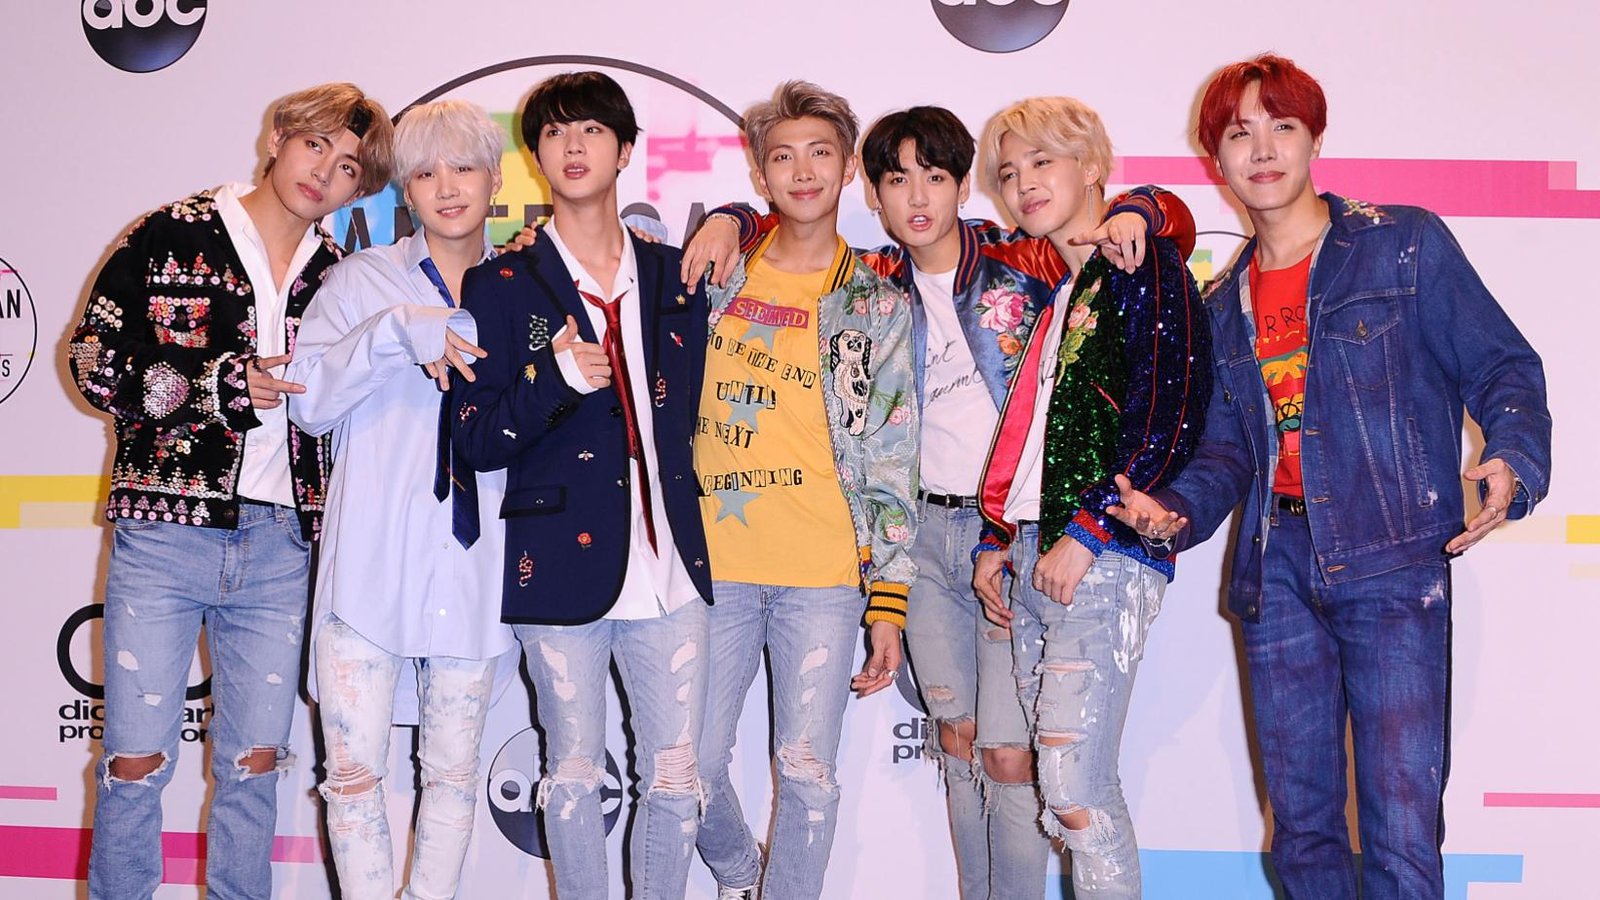 BTS' first album, Billboard's debut in seven years with April Fool's Day pranks on fans